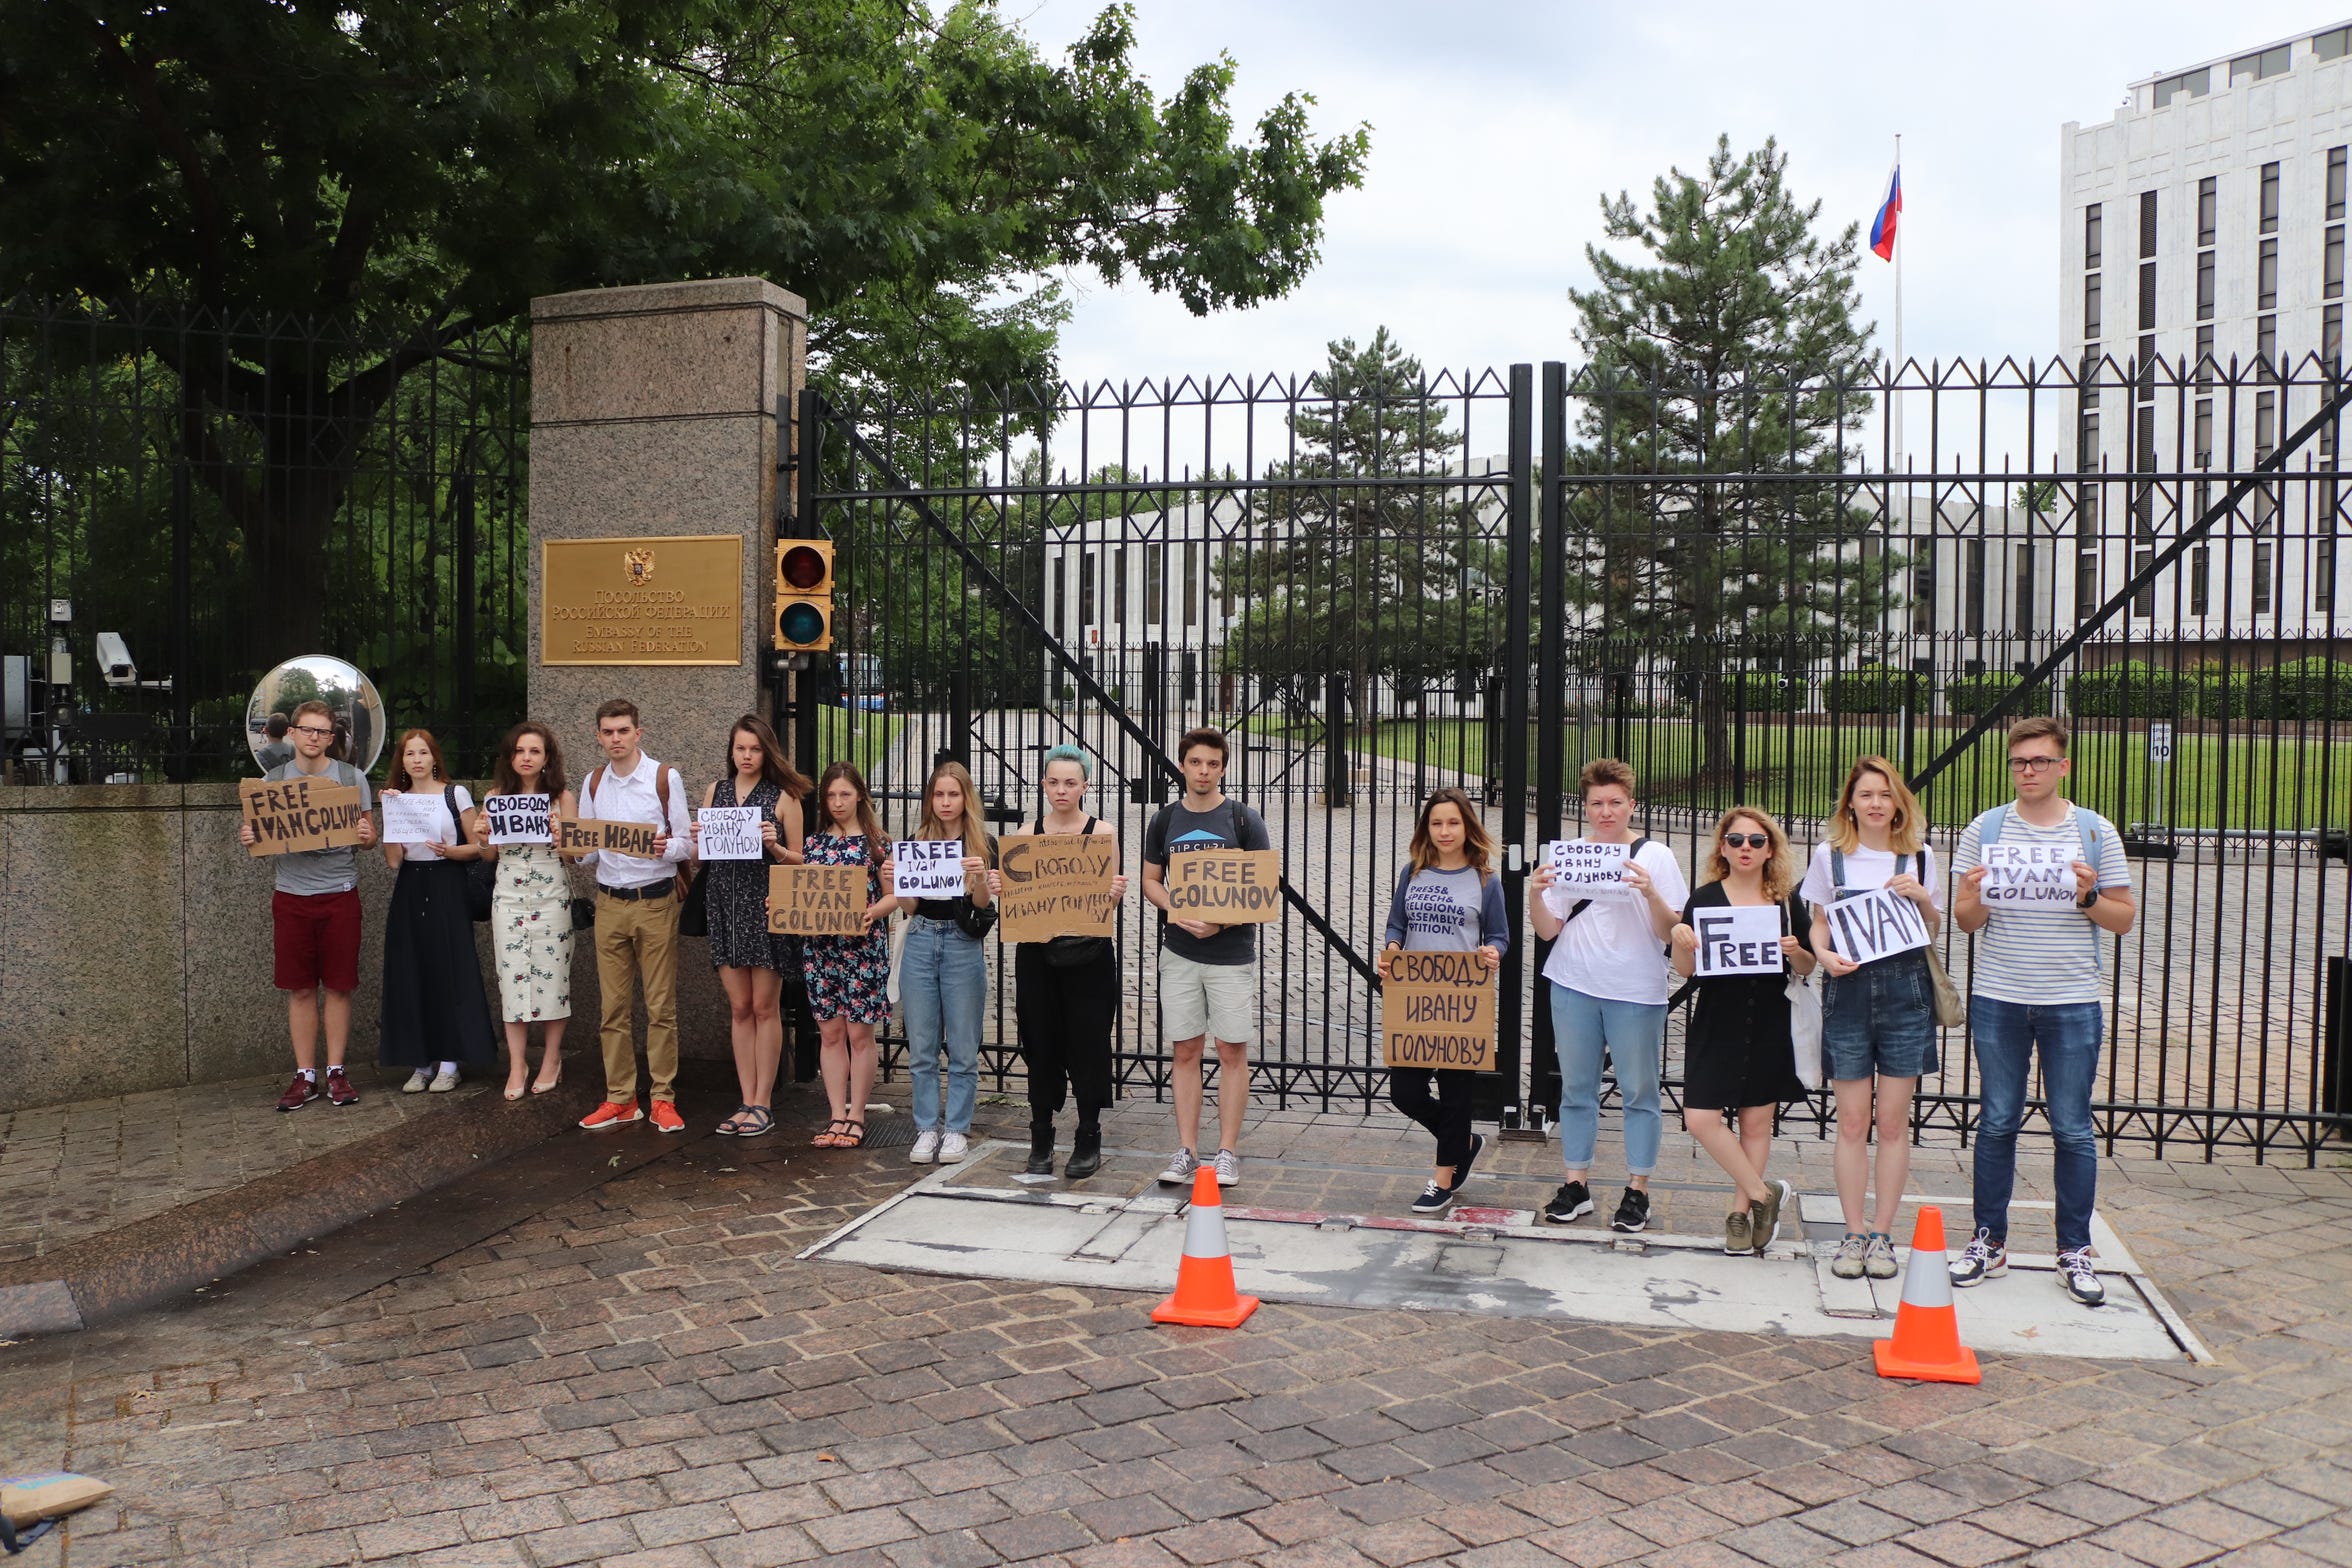 Free Ivan Golunov - rally of Russian journalists in front of the Russian Embassy in Washington, D.C.